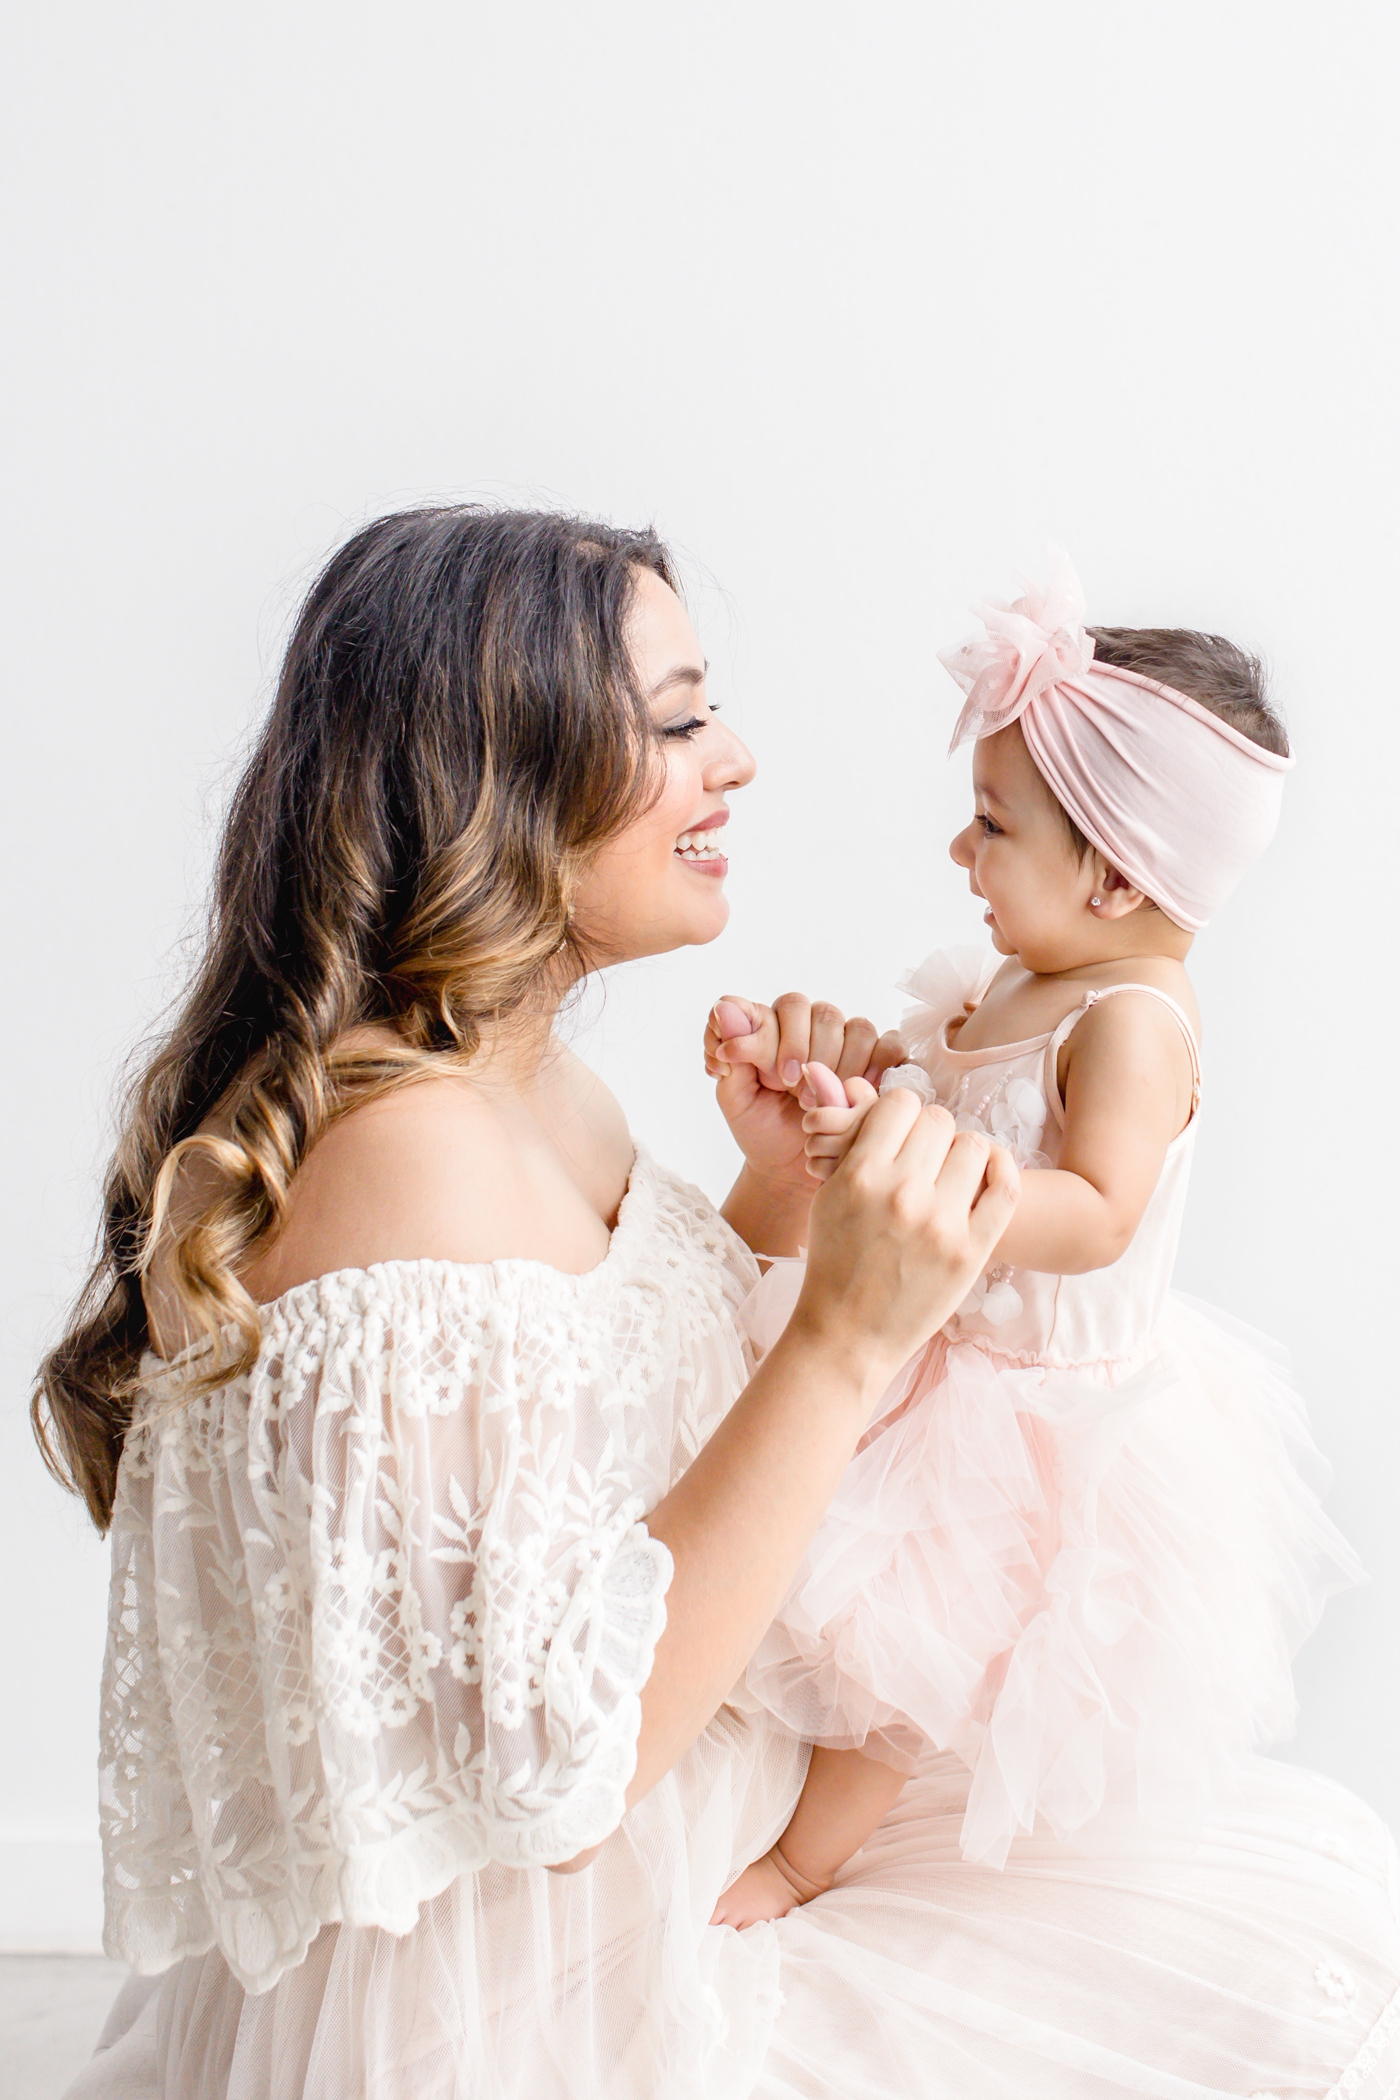 Mom holding baby and smiling during studio session. Photo by Cedar Park family photographer, Sana Ahmed Photography.